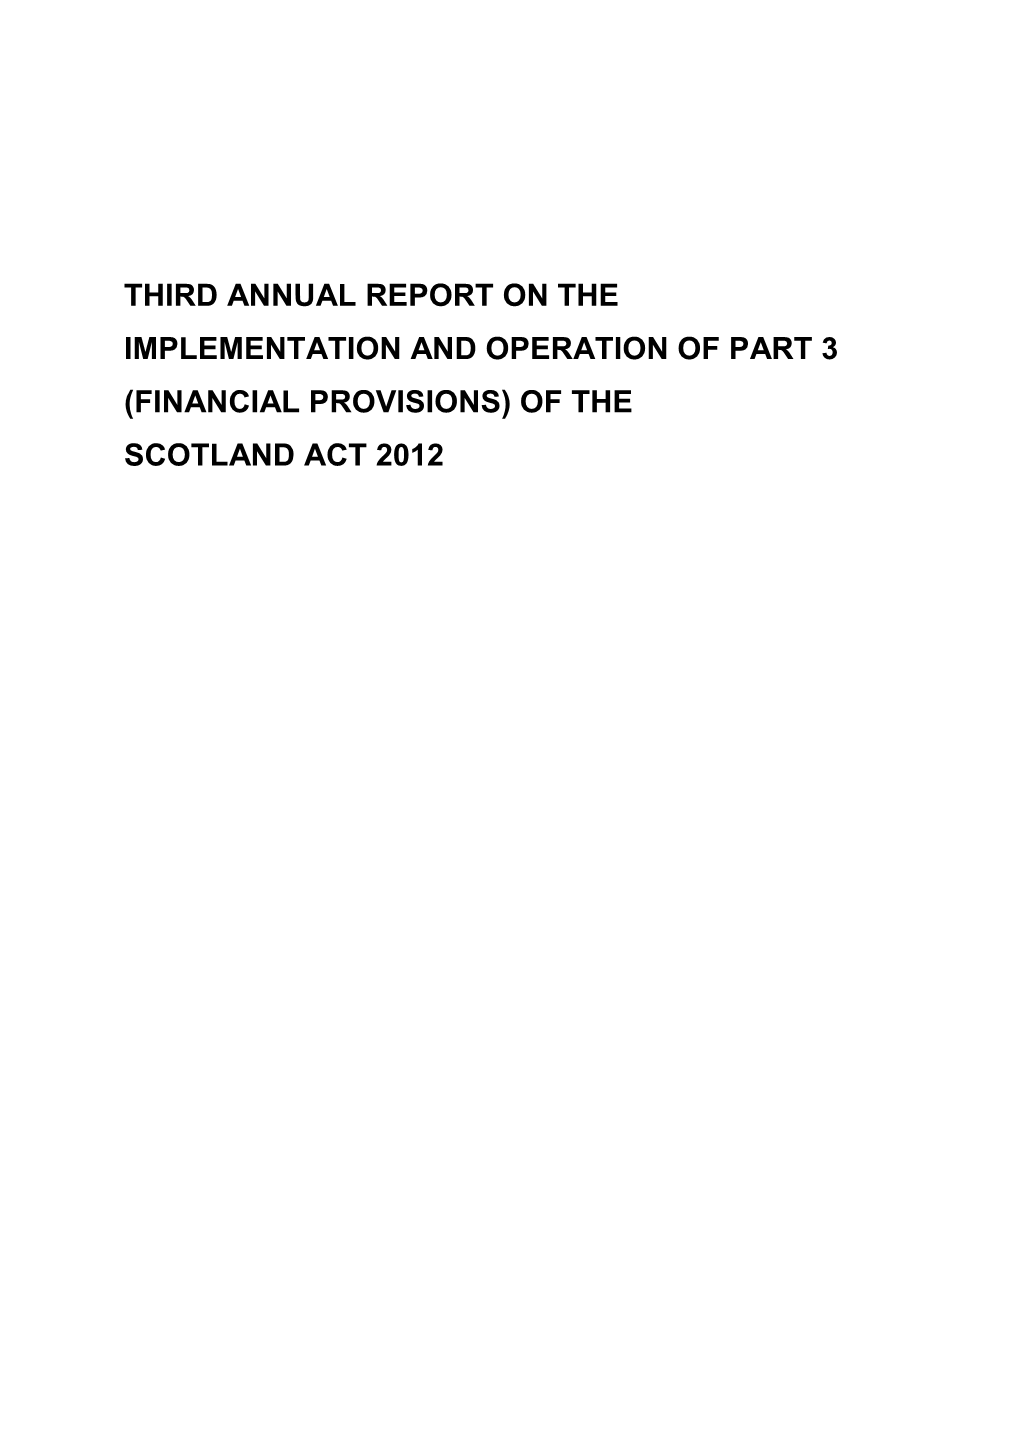 (Financial Provisions) of the Scotland Act 2012